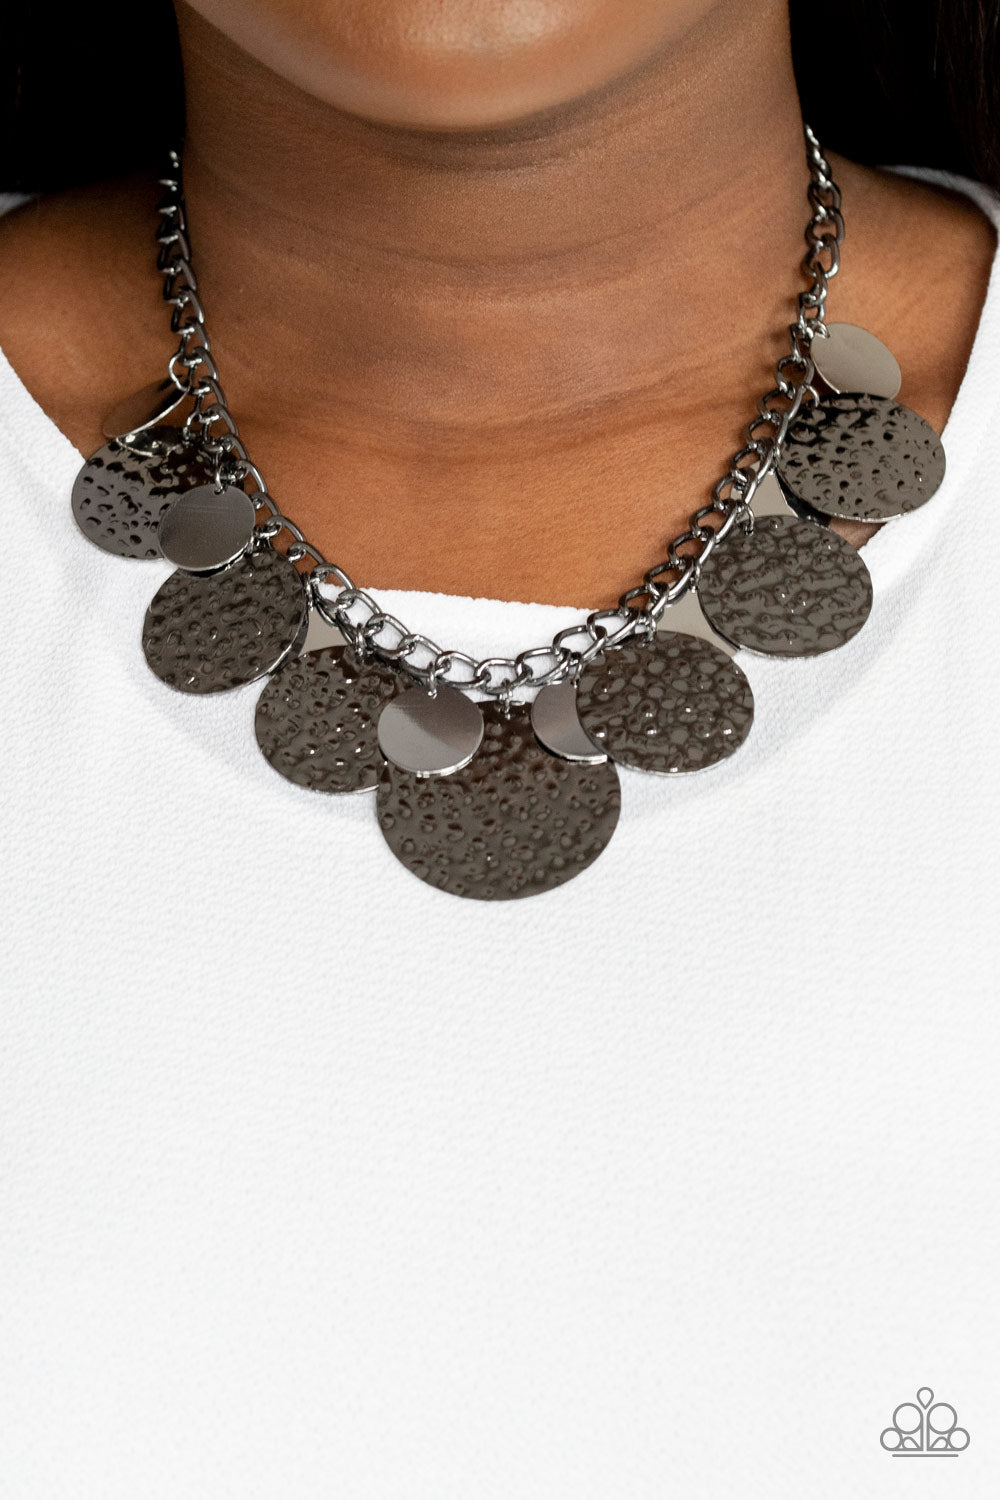 Paparazzi Industrial Grade Glamour - Black Necklace - A Finishing Touch Jewelry